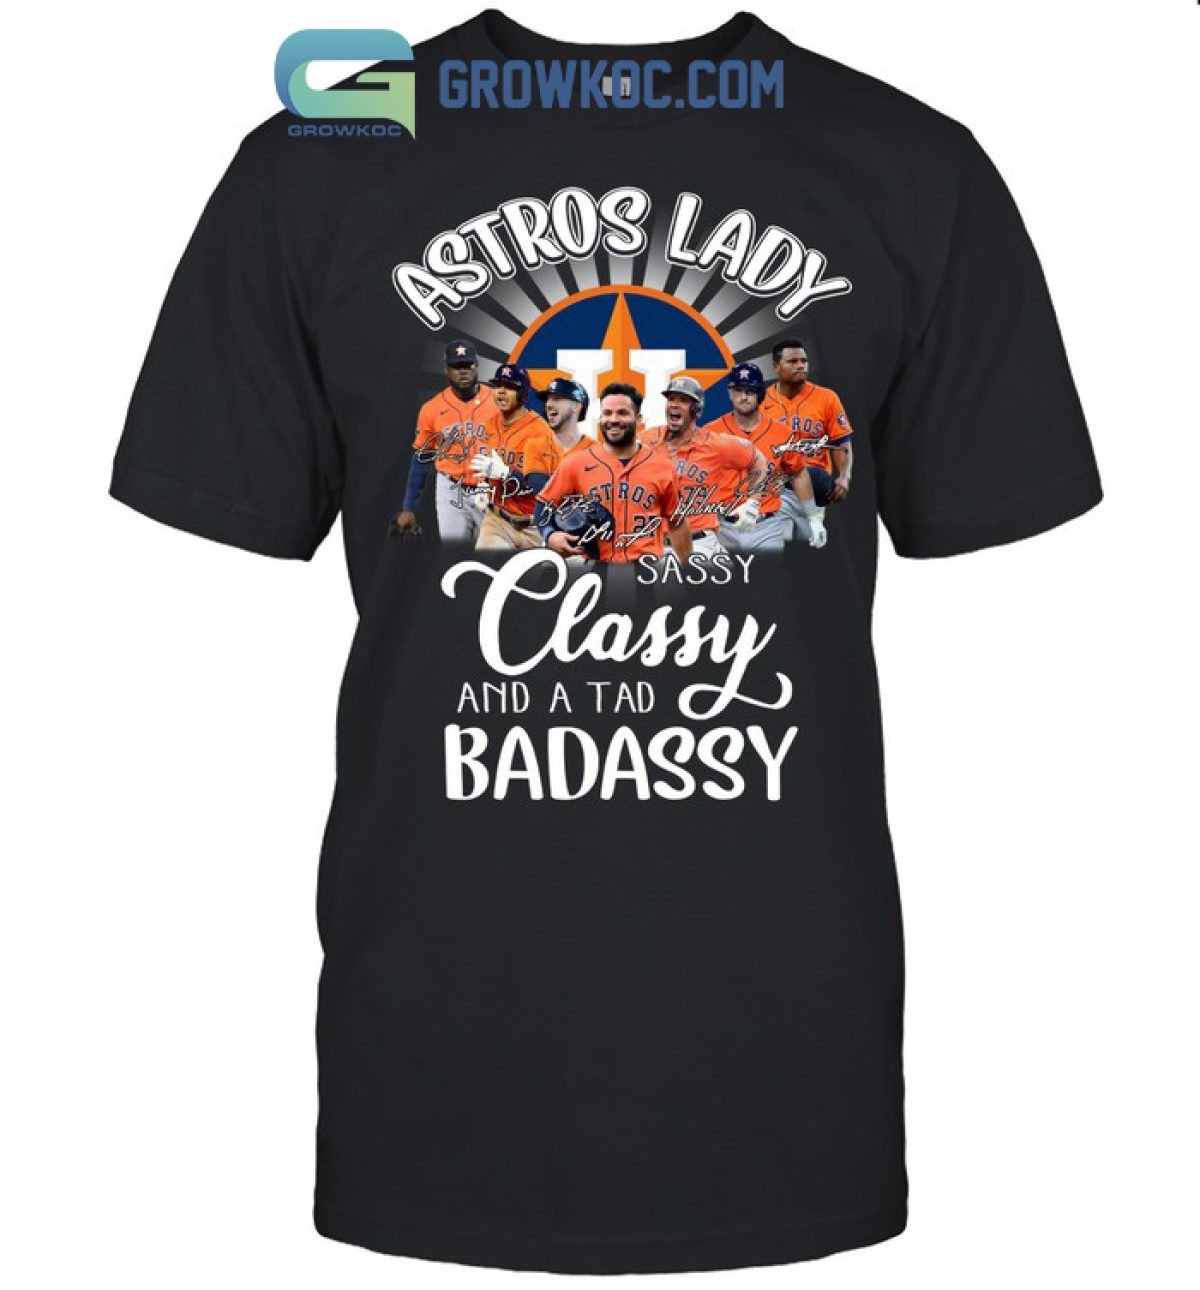 Vintage Astros Shirt Women Astros Girl Classy Sassy And A Bit